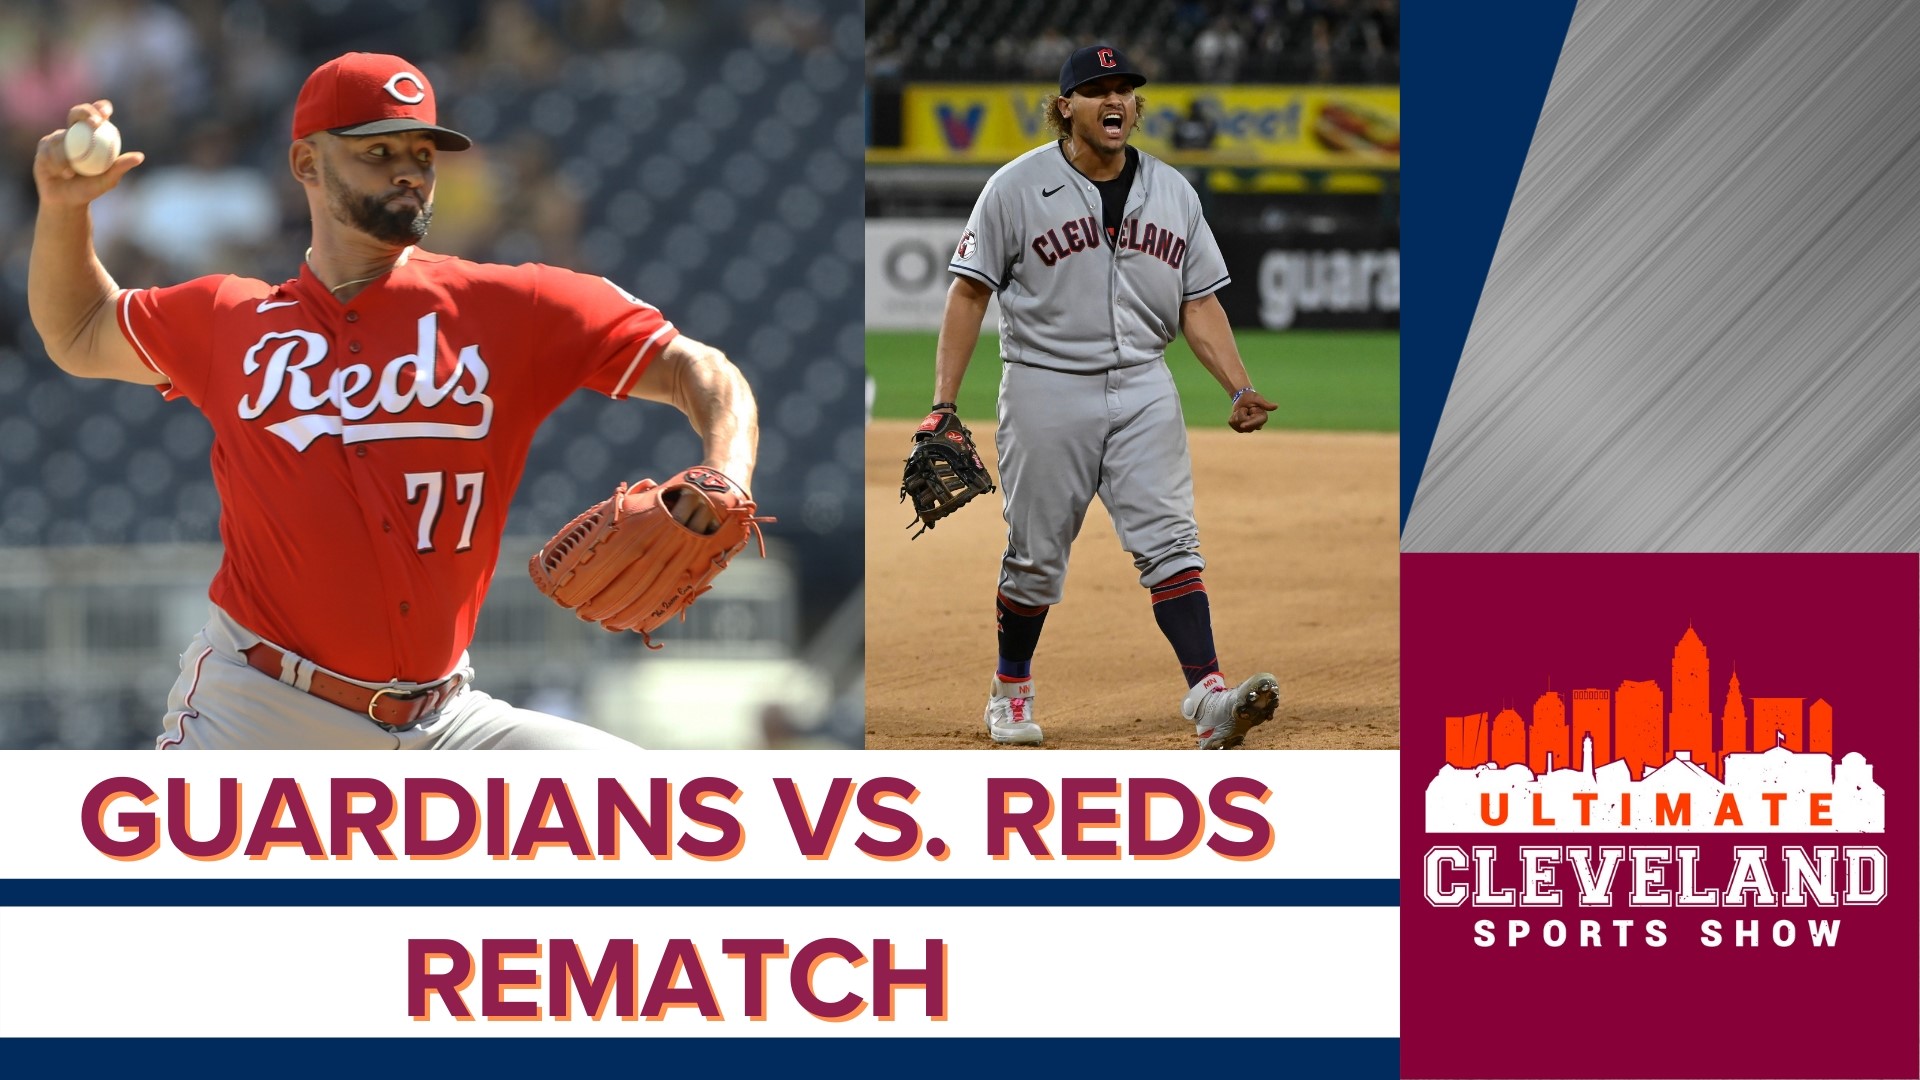 The Cleveland Guardians have a history of beating the Cincinnati Reds. The guys discuss whether the Reds have a chance of beating the Guardians, despite their record